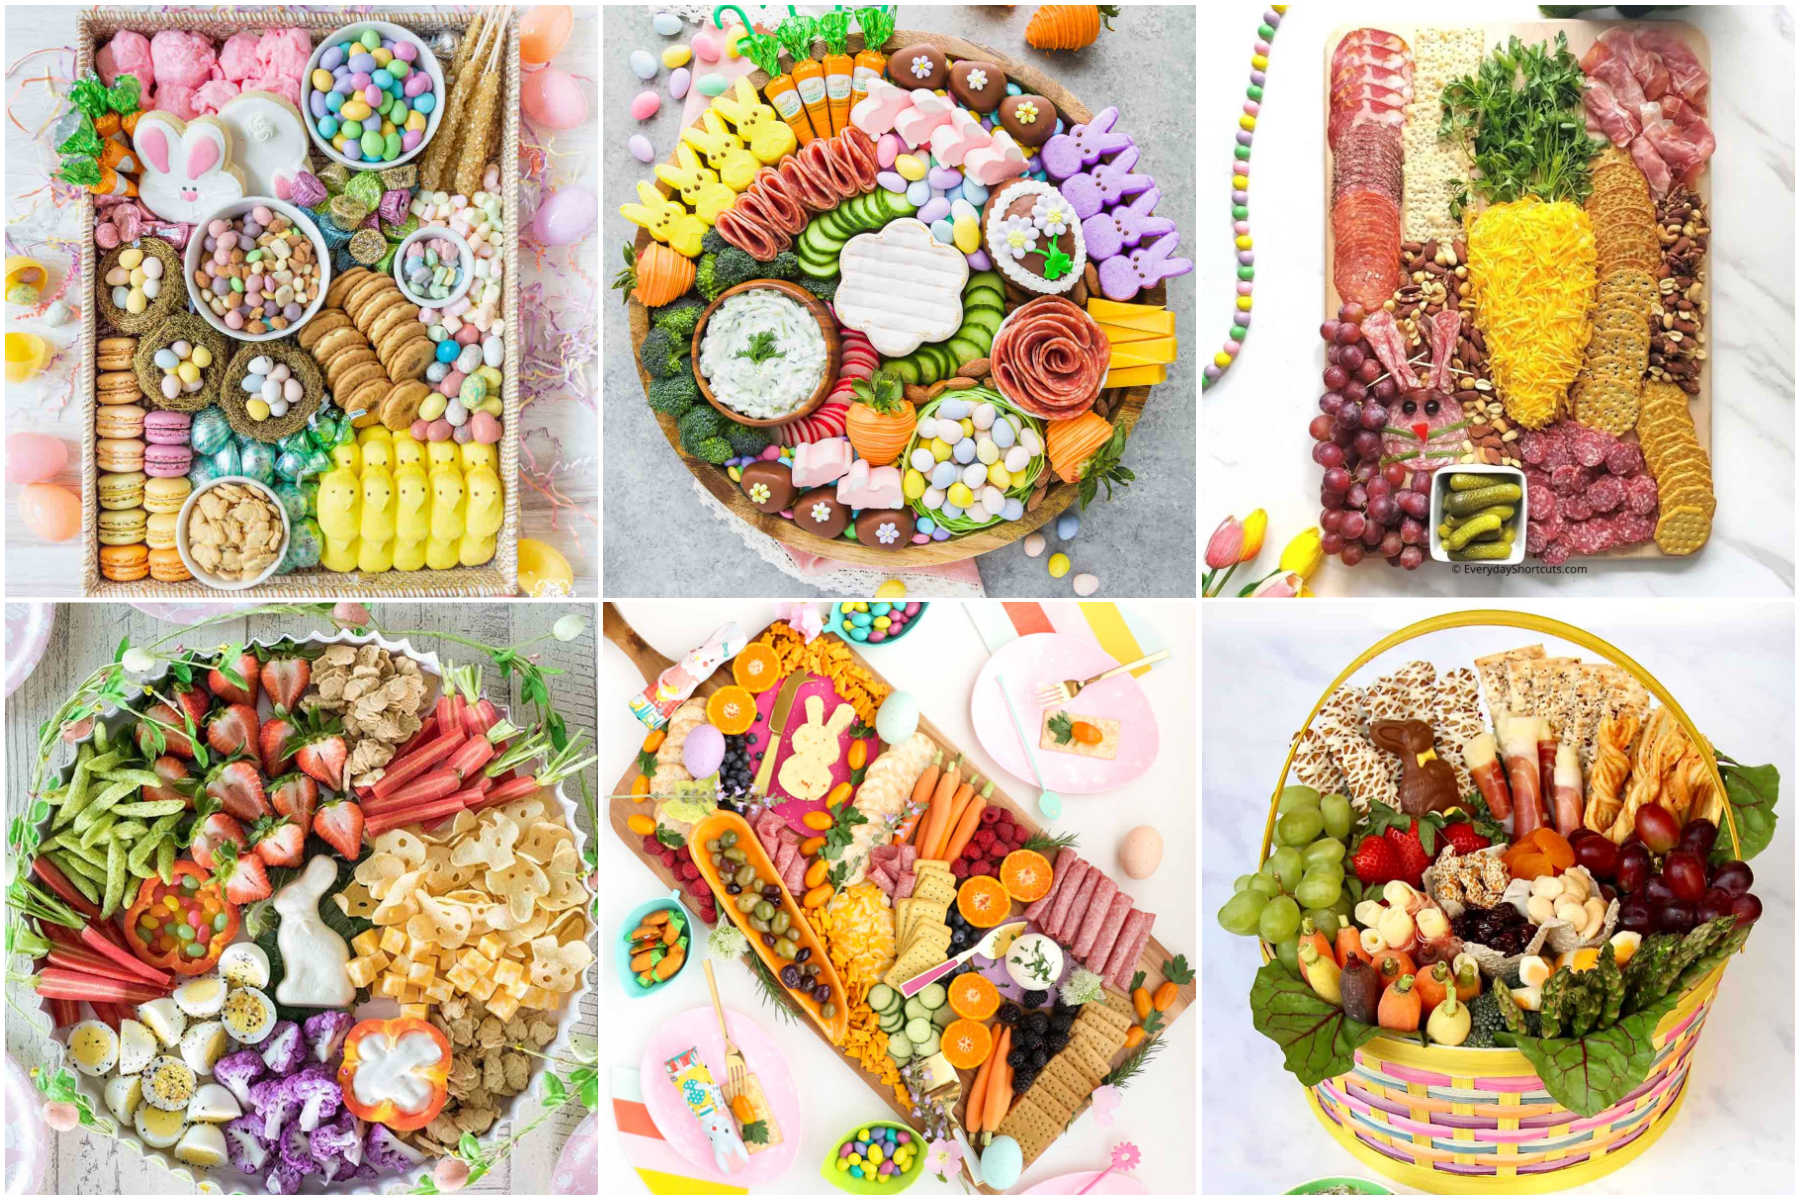 https://www.playpartyplan.com/wp-content/uploads/2023/03/easter-charcuterie-board-ideas-collage.jpeg